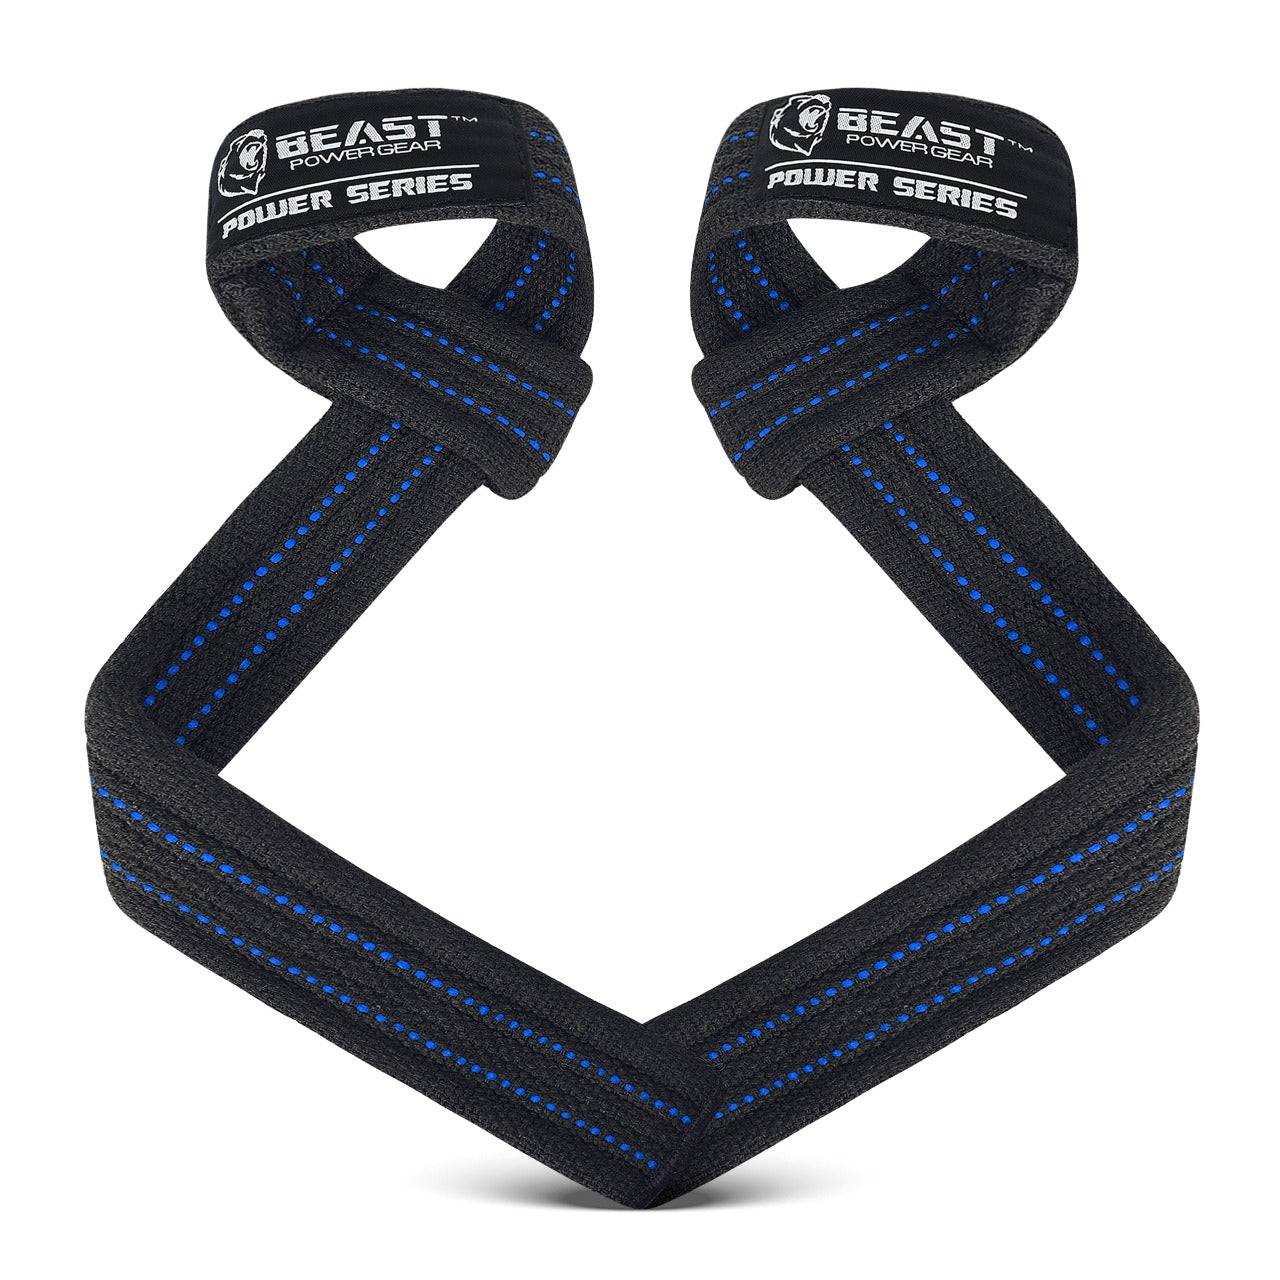 Armor Lifting Straps  Weight lifting straps